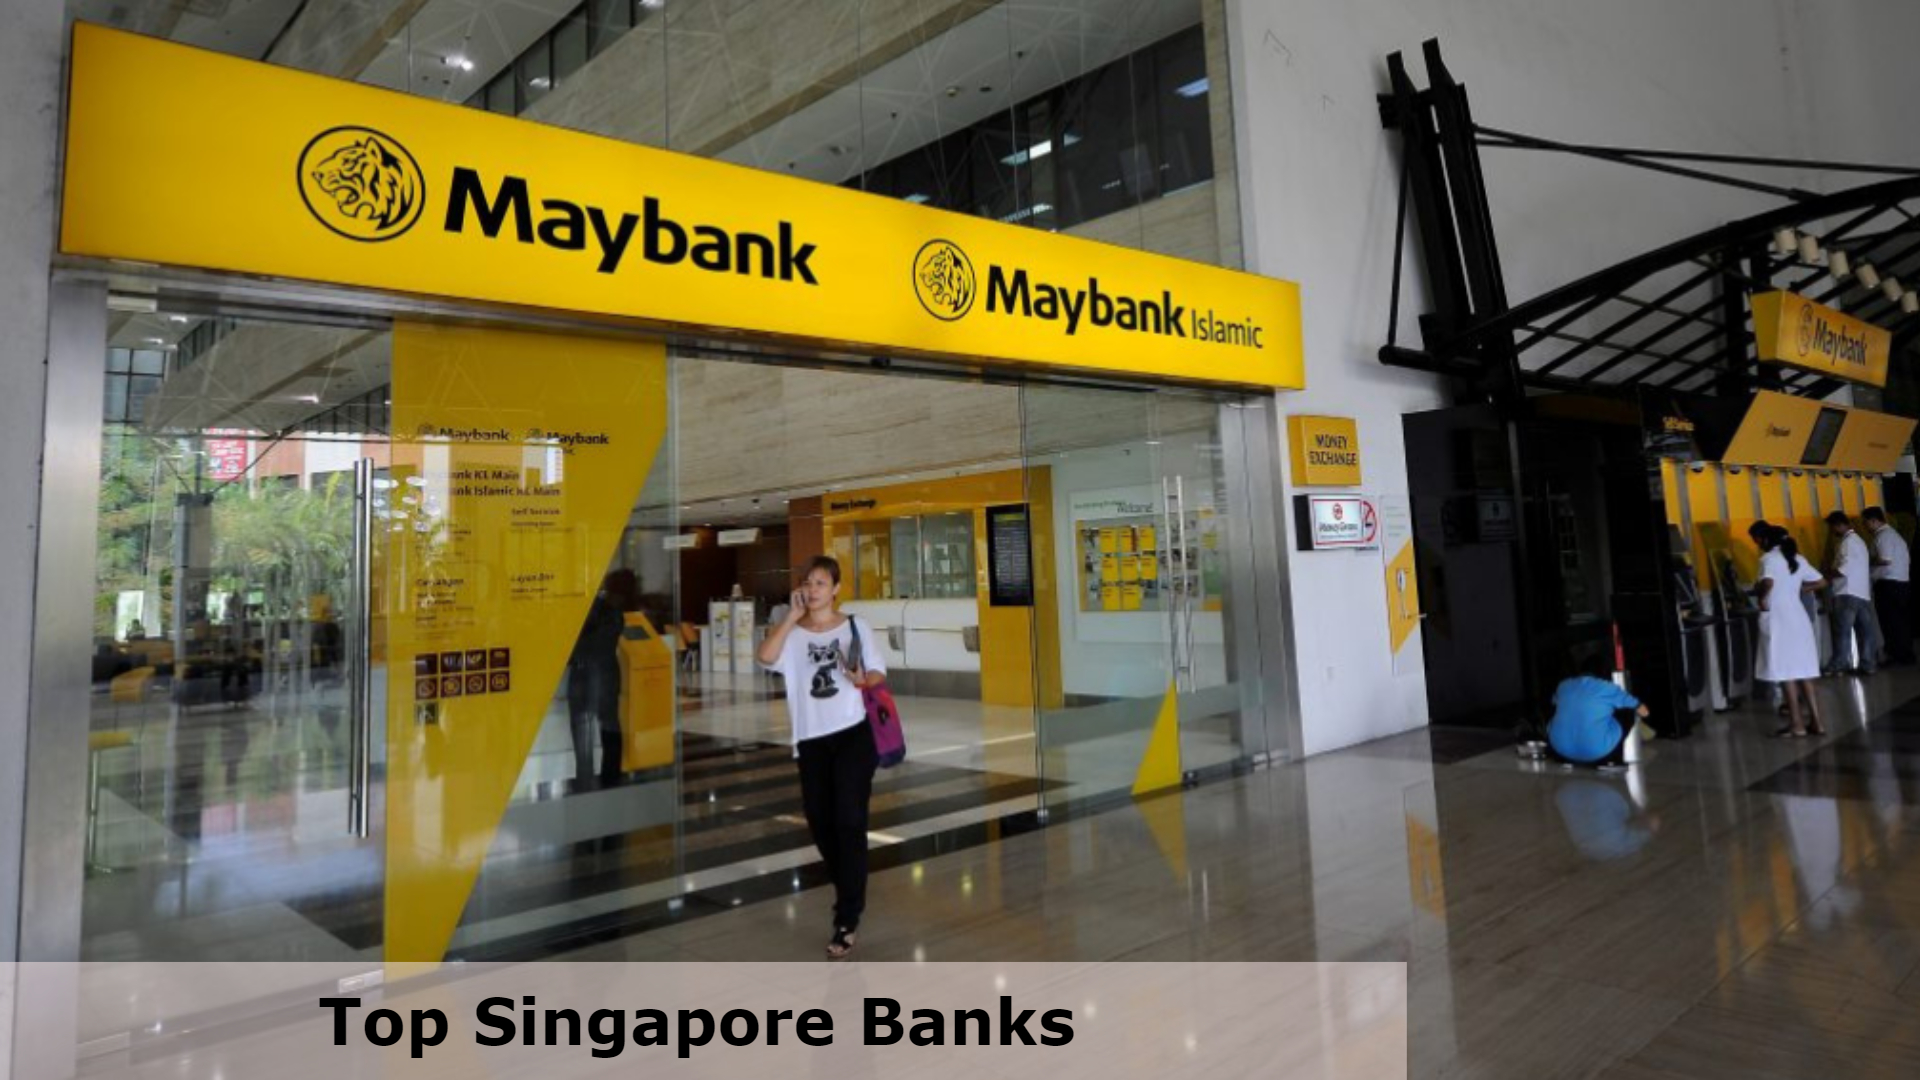 Which Singapore Bank is the Best, What is the number 1 bank in Singapore?, Which is the Safest Bank in Singapore?, What is the strongest bank in Singapore?, Which bank is best for foreigners in Singapore?, top 5 banks in singapore, list of banks in singapore (mas), list of banks in singapore, 
foreign banks in singapore, list of private banks in singapore, private banks in singapore, top banks in singapore, local banks in singapore, What is the number 1 bank in Singapore?, What is the strongest bank in Singapore?, What are the top 5 major banks?, Which bank is safest in Singapore?, 